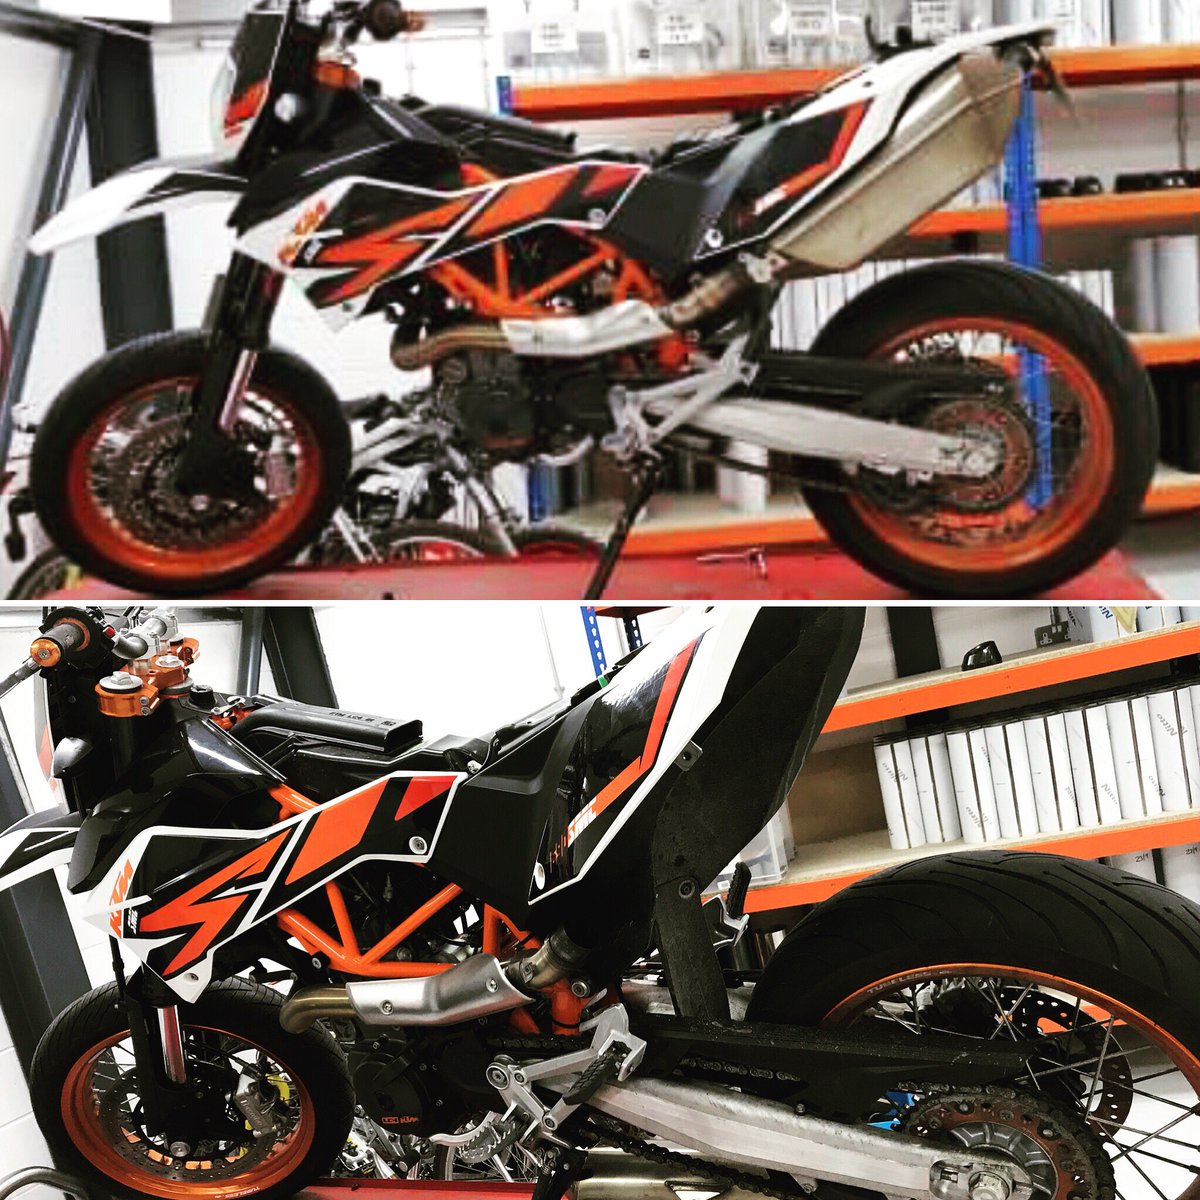 Fuel Exhausts Ltd 14 Ktm 690 Smc In For A New Exhaust Our Customer Has Opted For A Diablo Exhaust In Ceramic Black We Need To Manufacture A Small Connecting